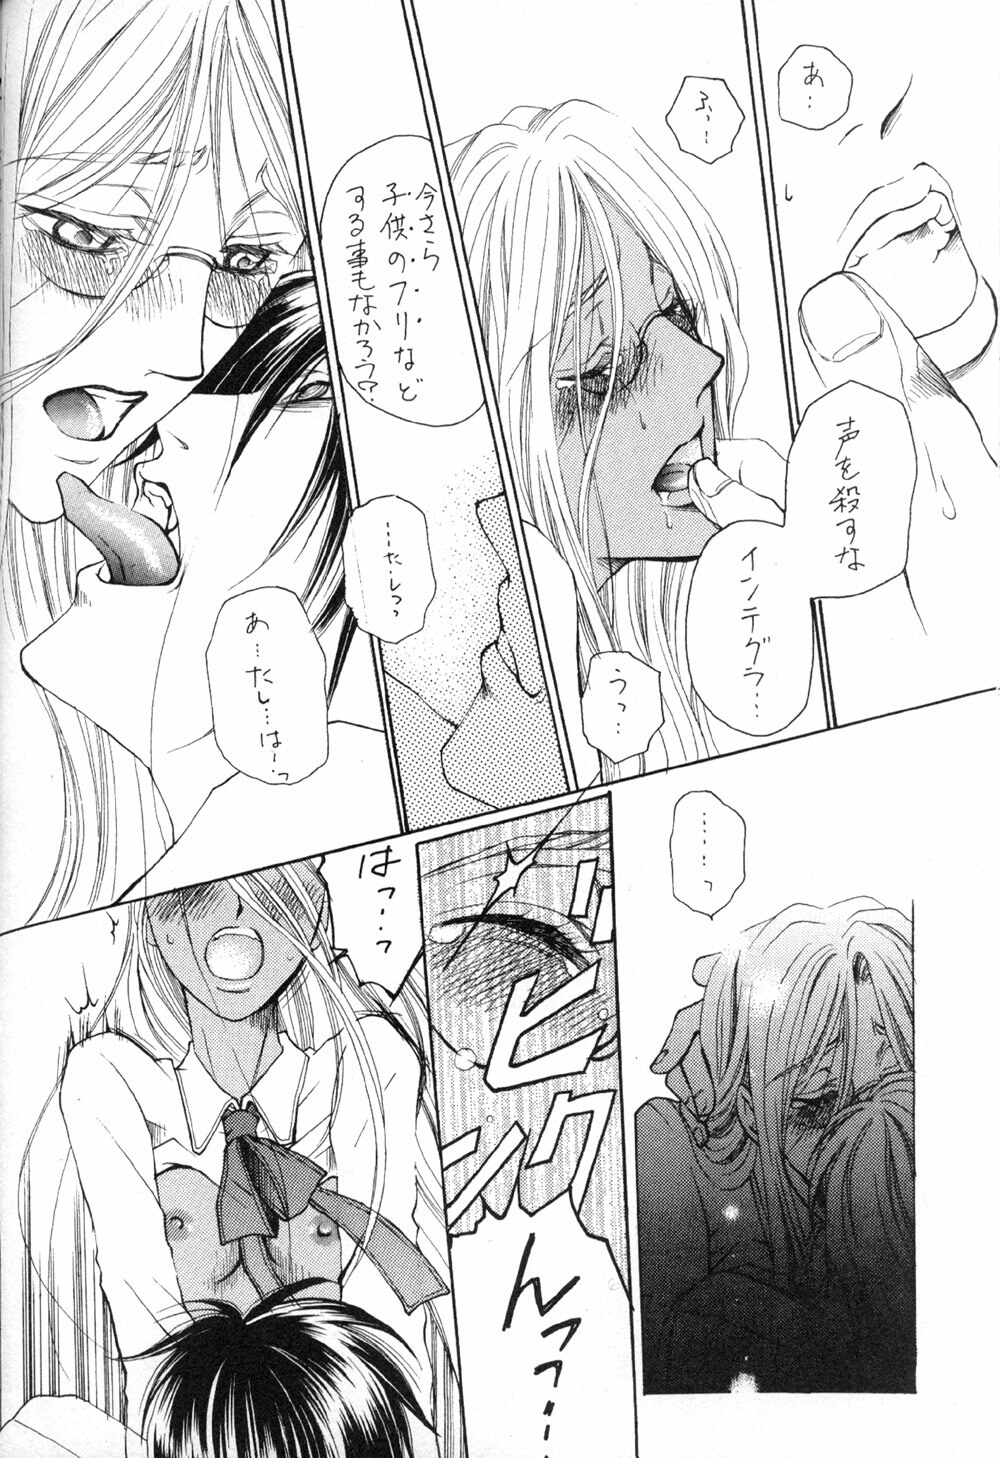 The Long Tunnel of Wanting You (Hellsing) page 16 full